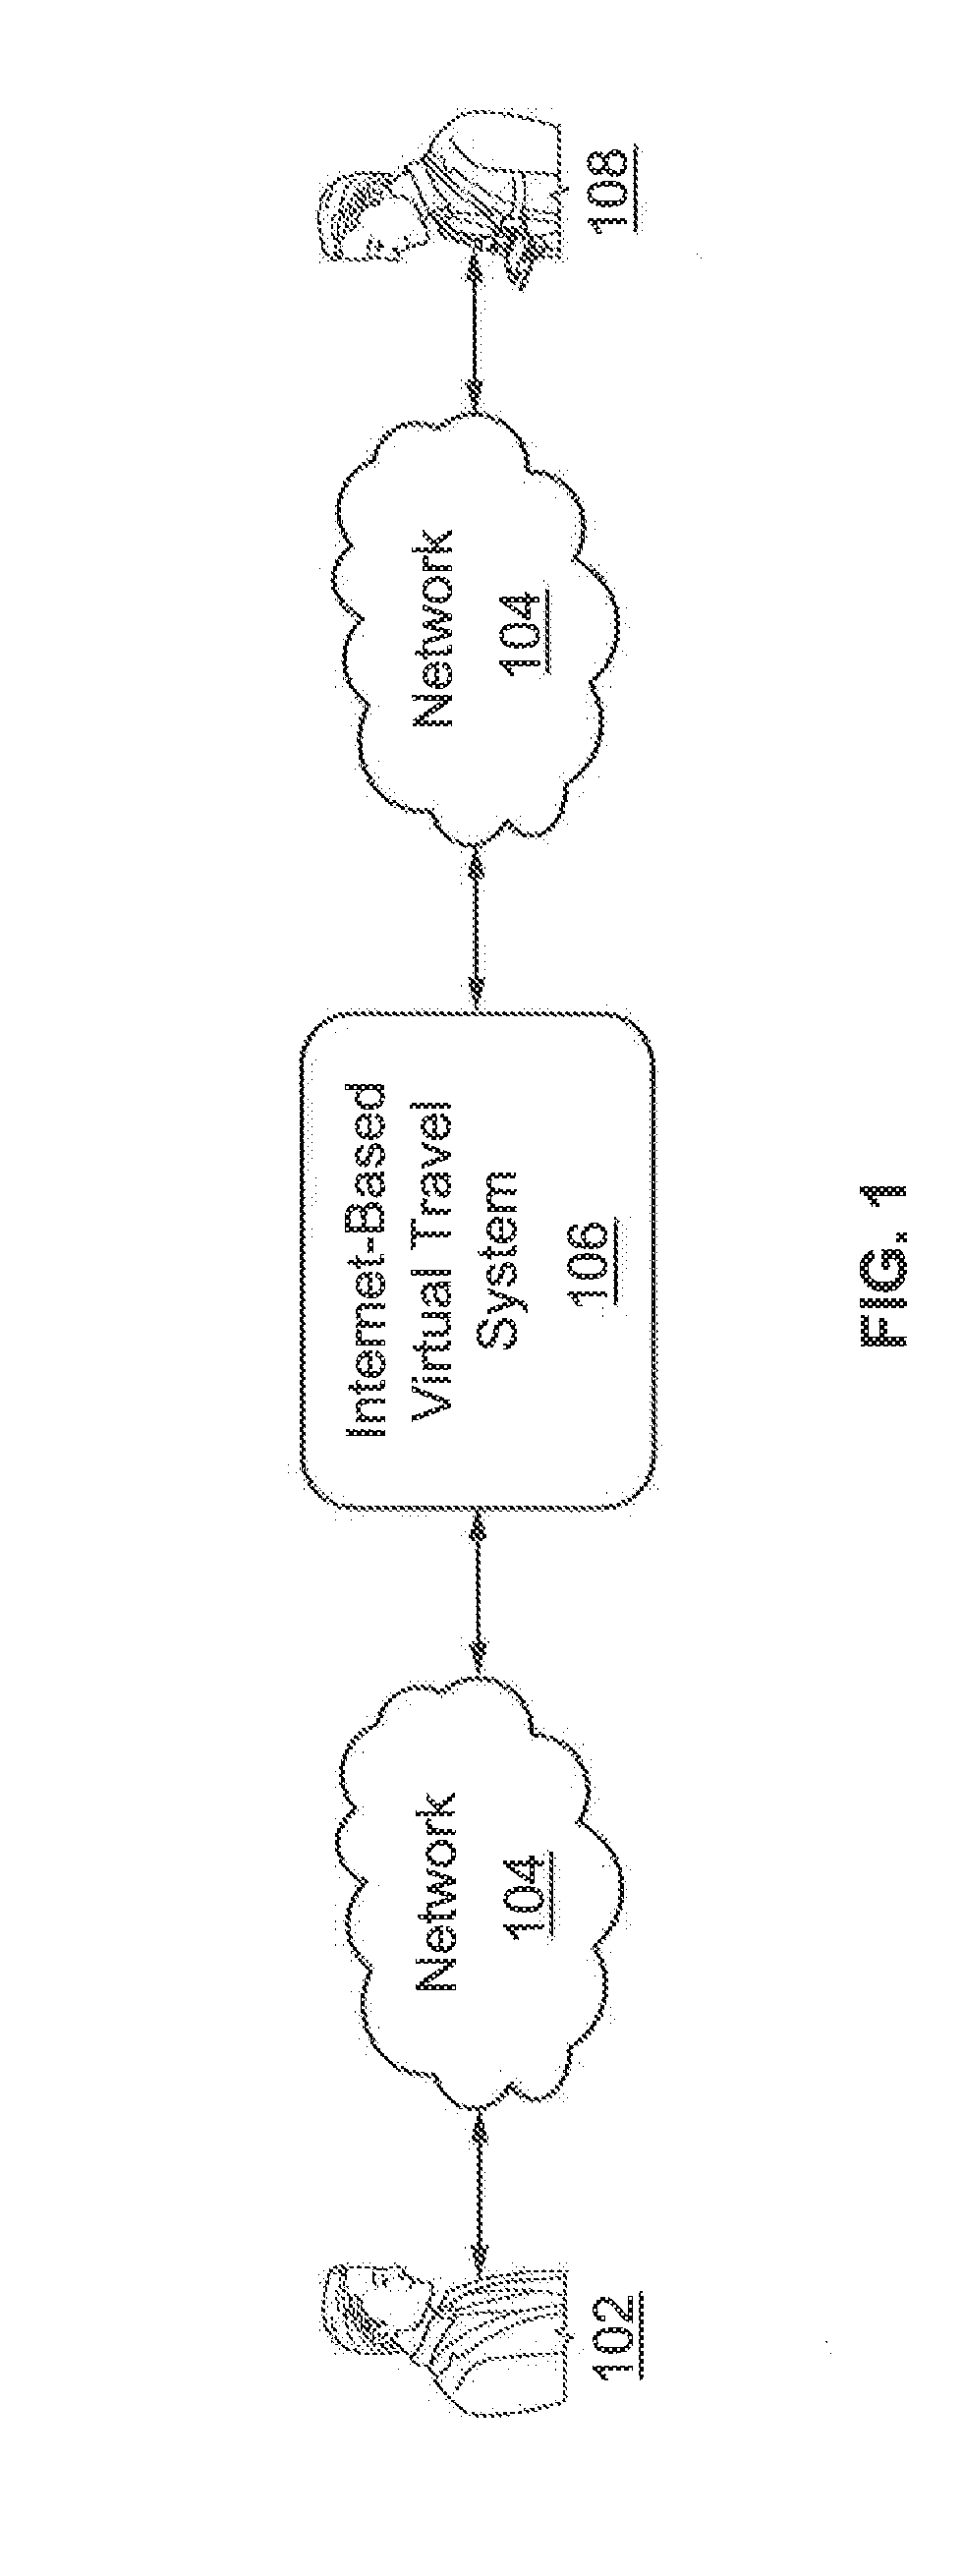 Internet-based real-time virtual travel system and method